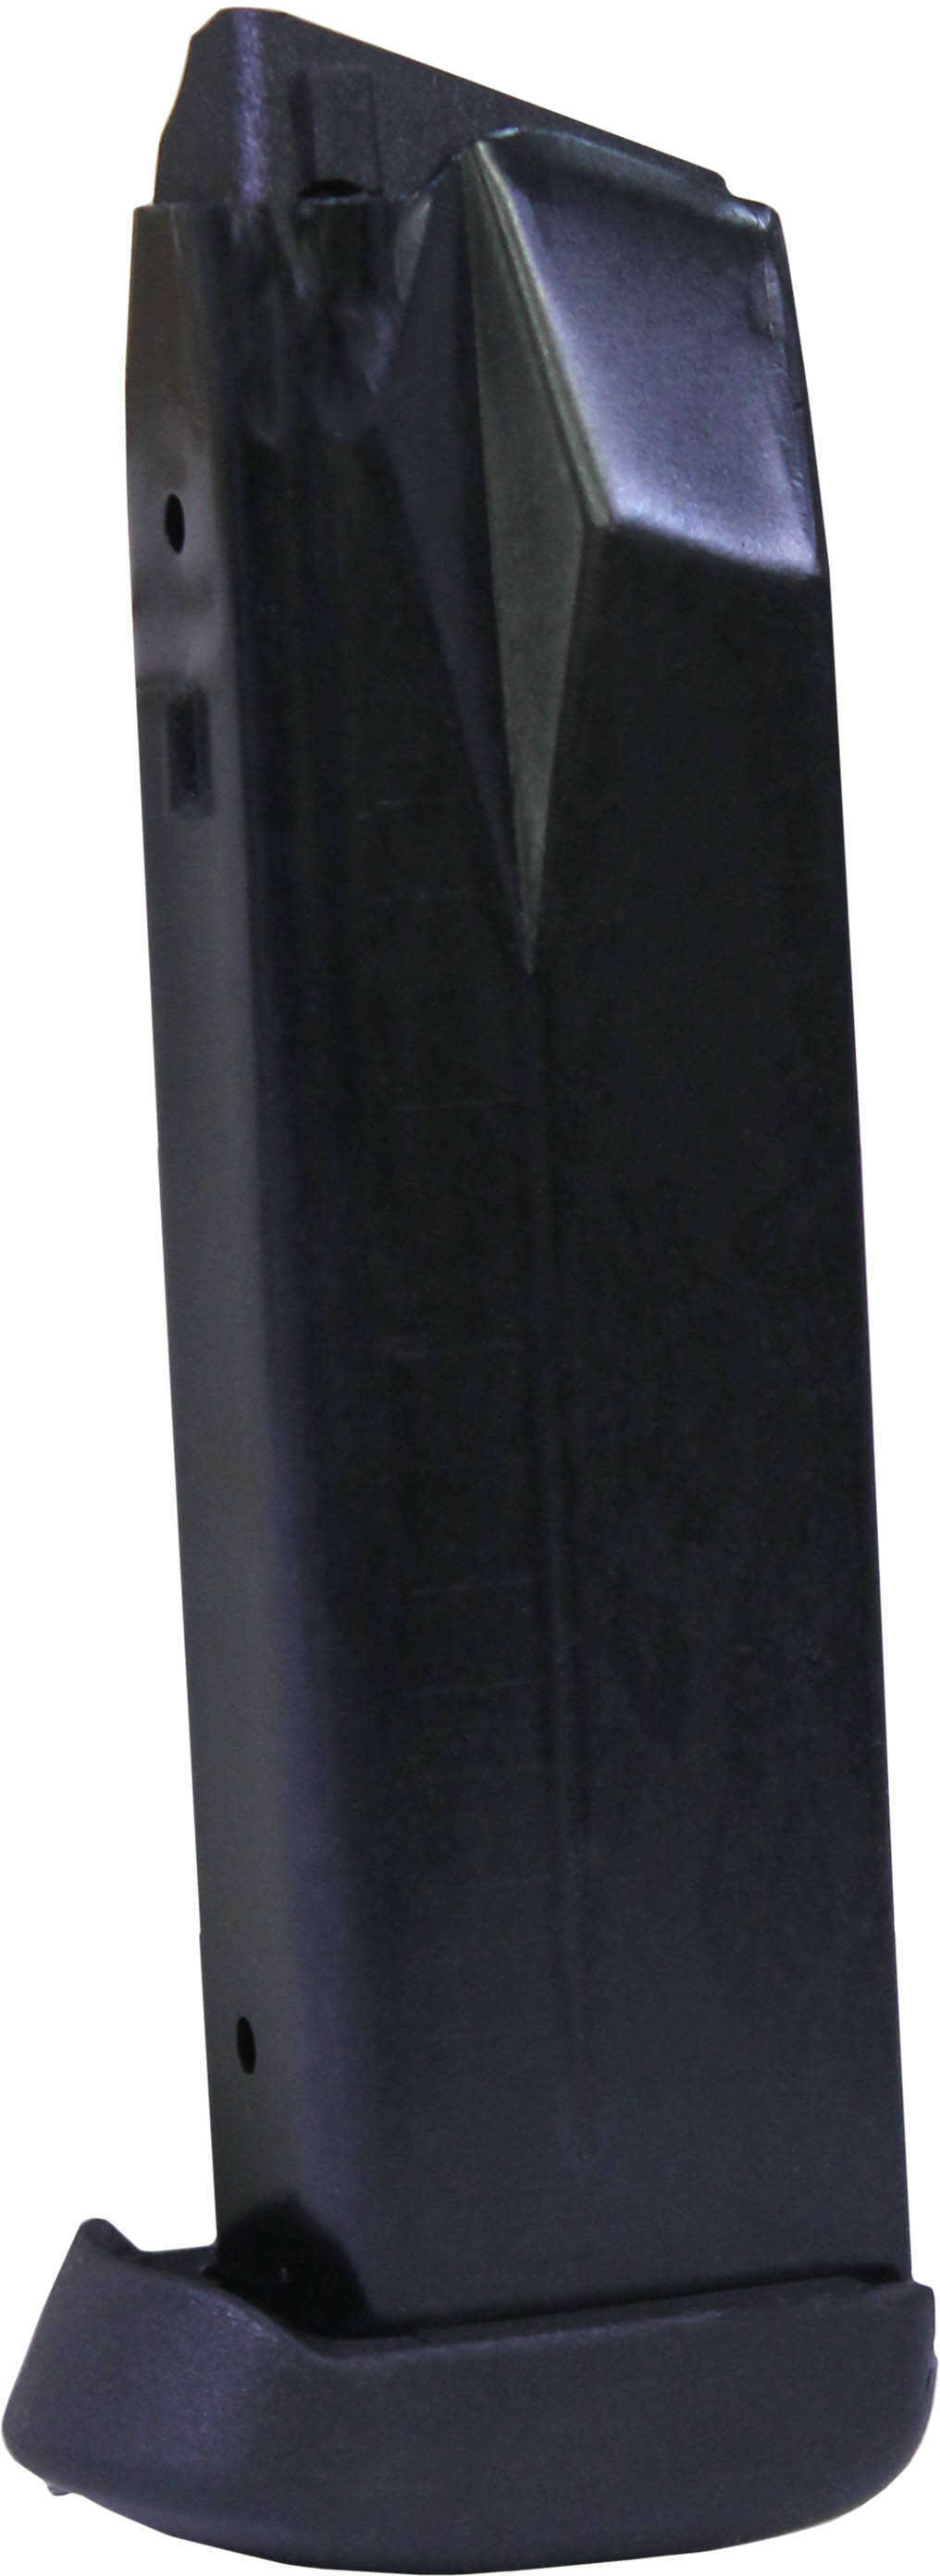 ProMag FNH FNX45 .45 ACP Magazine 13 Rounds Blue Steel Md: FNH-A5-img-1